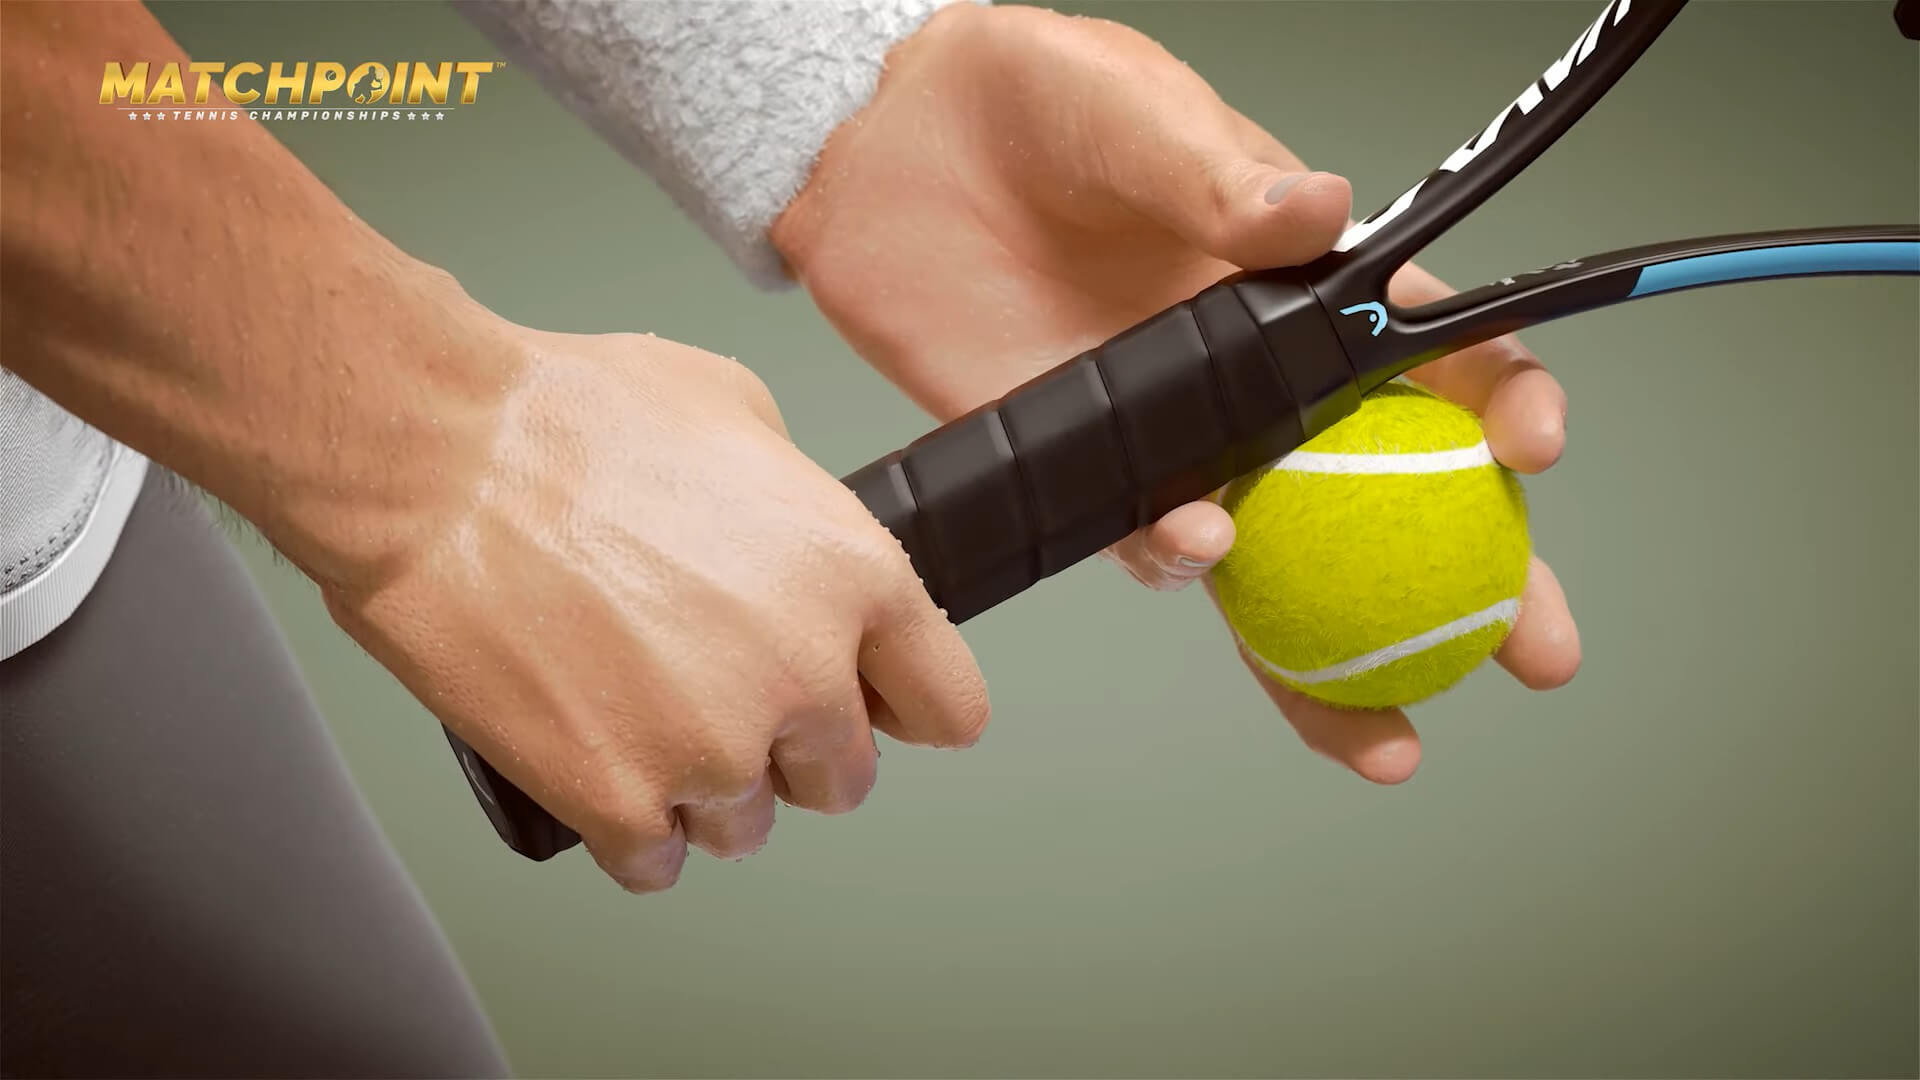 Matchpoint - Tennis Championships first previews, game will be on Game Pass at release